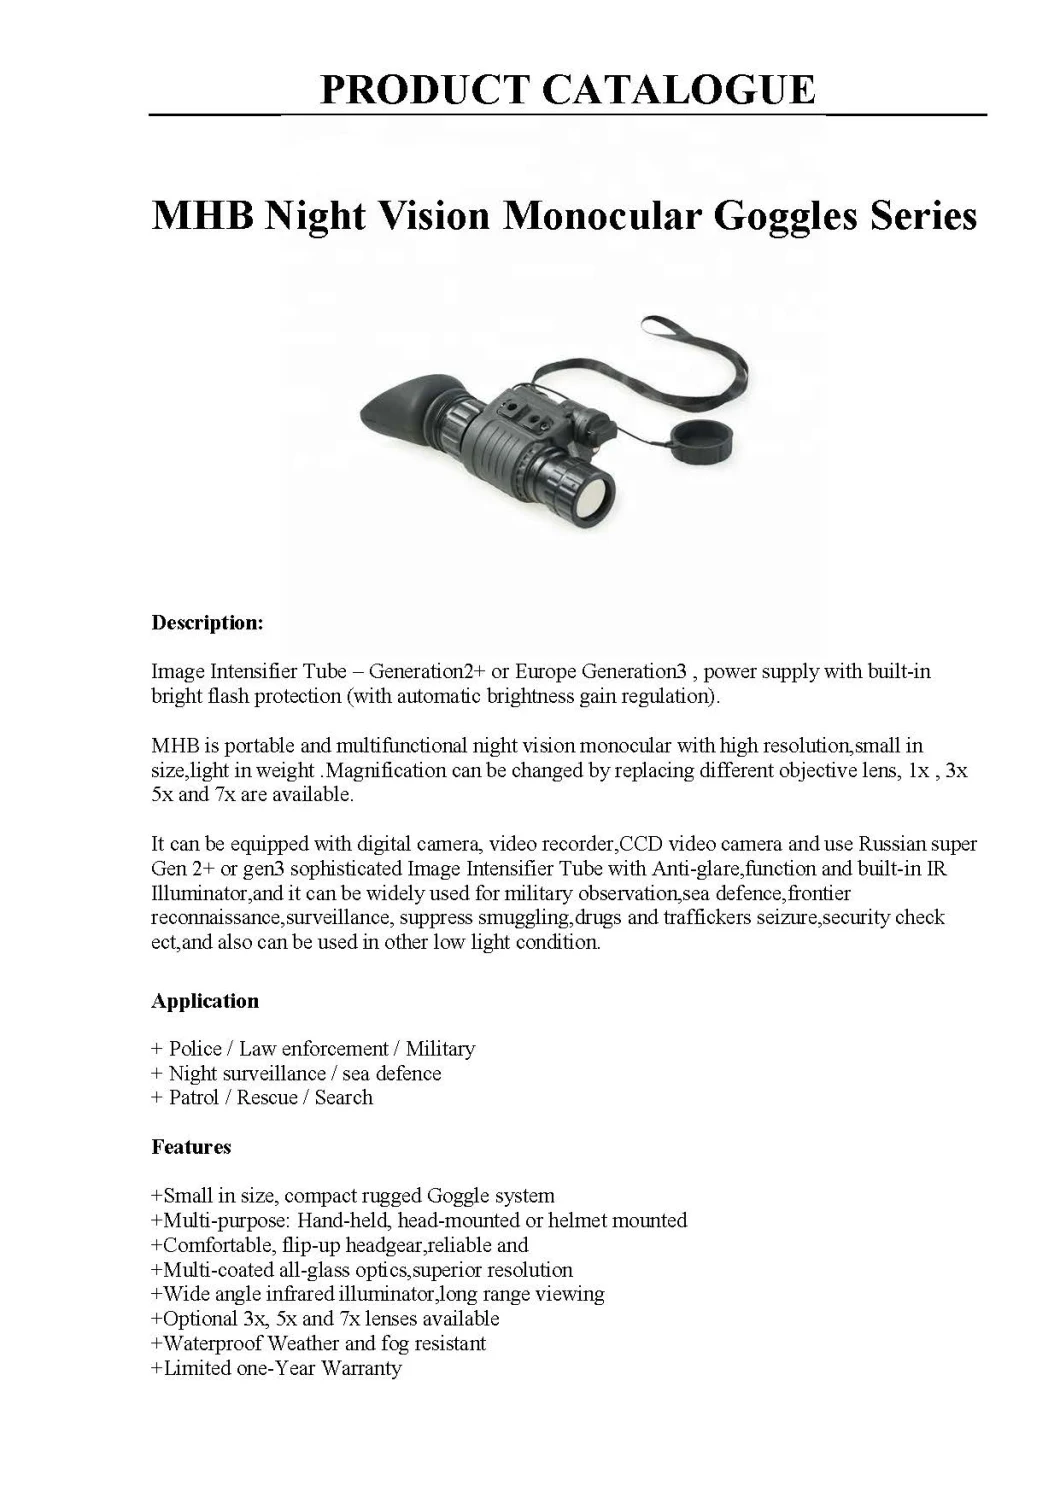 Goggles Night Vision Cameras with Helmount